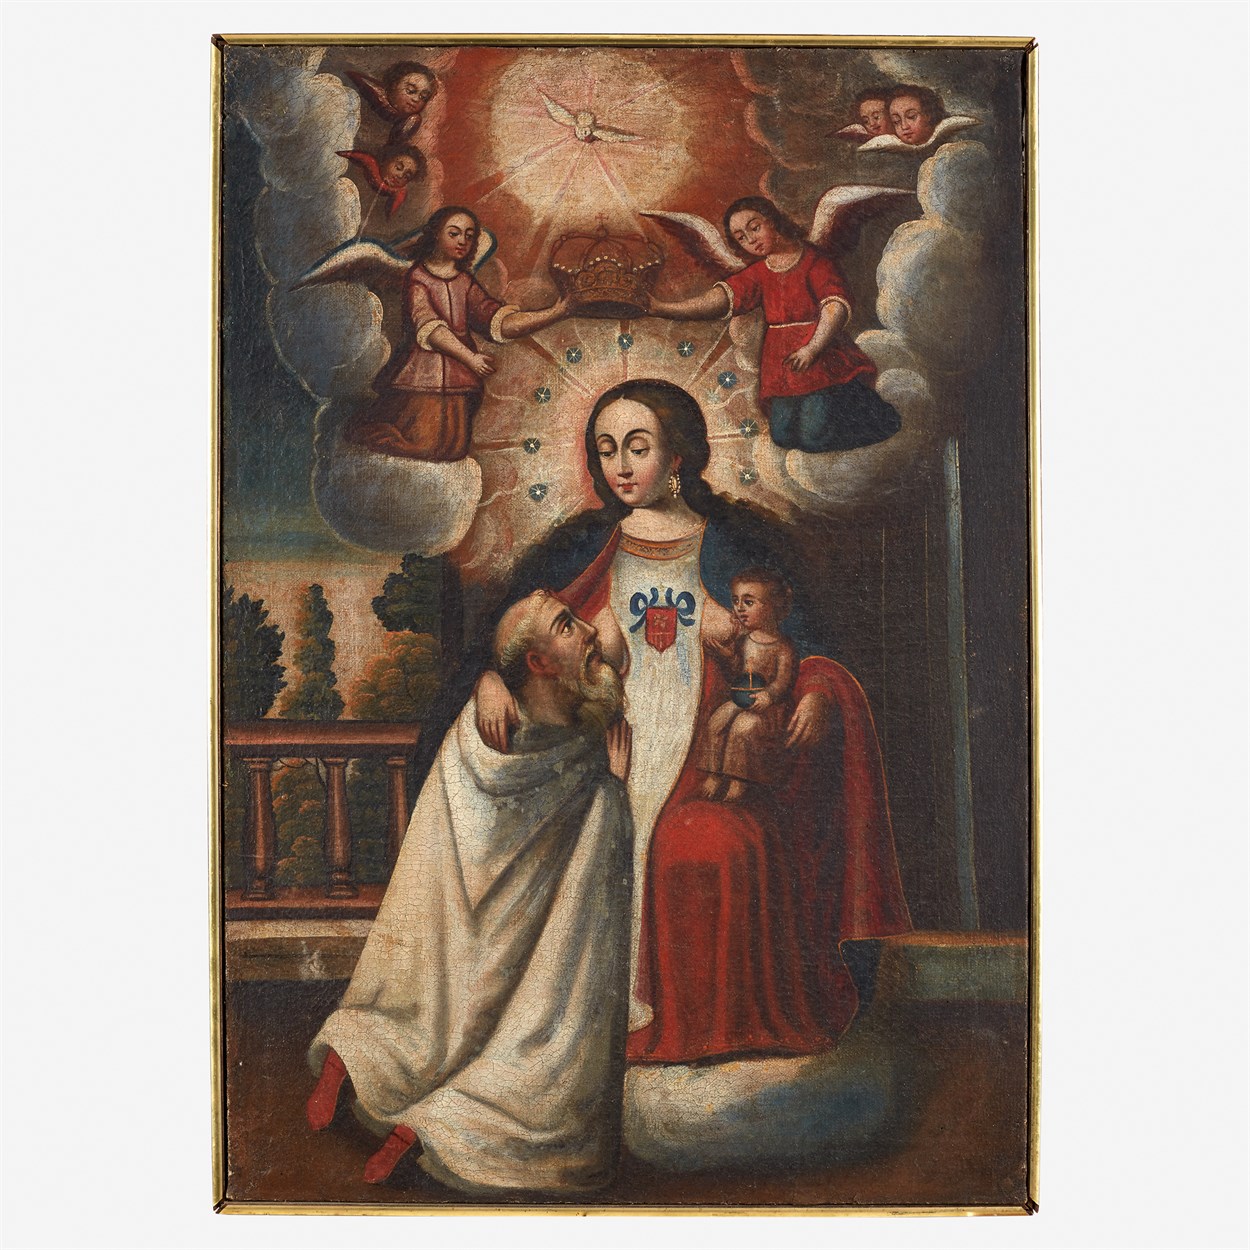 Lot 22 - The Lactation of the Cistercian St. Bernard of Clairvaux (1090-1153)